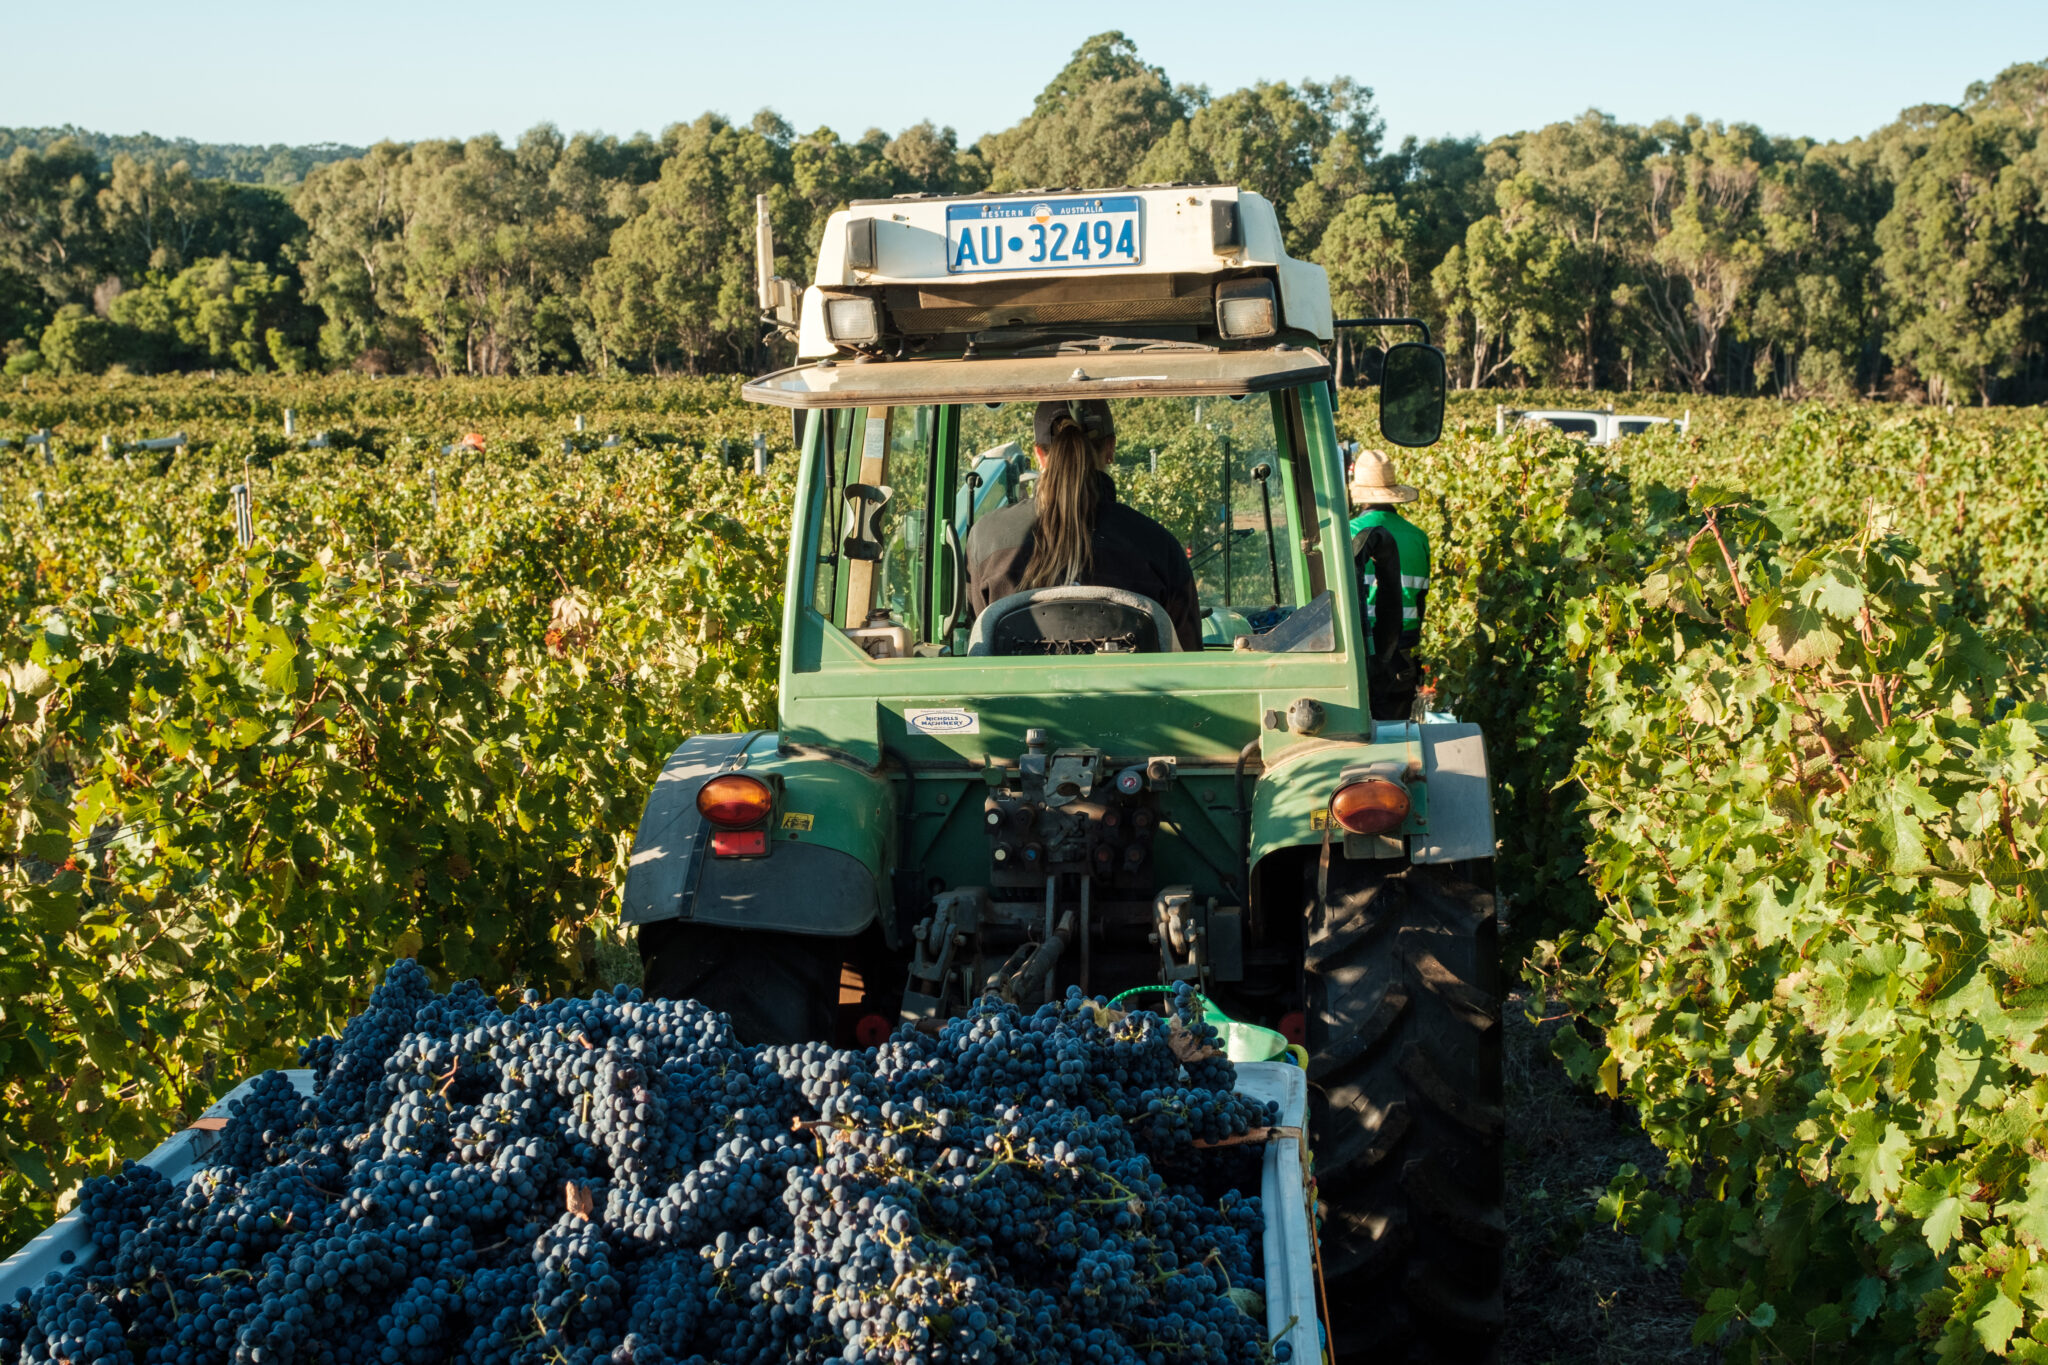 Tractor pulling a load of freshly picked grapes